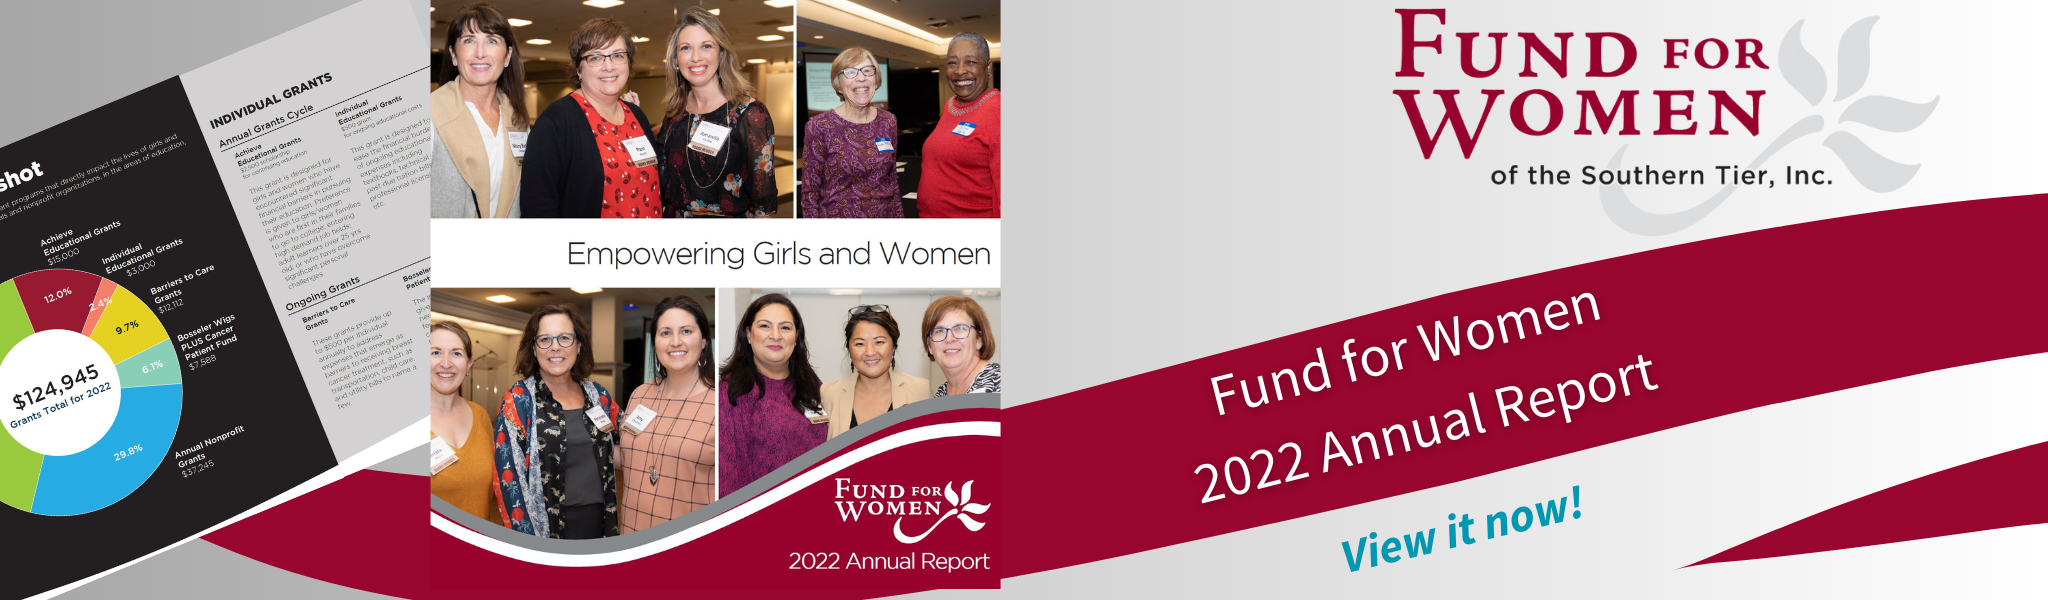 FFW 2022 Annual Report